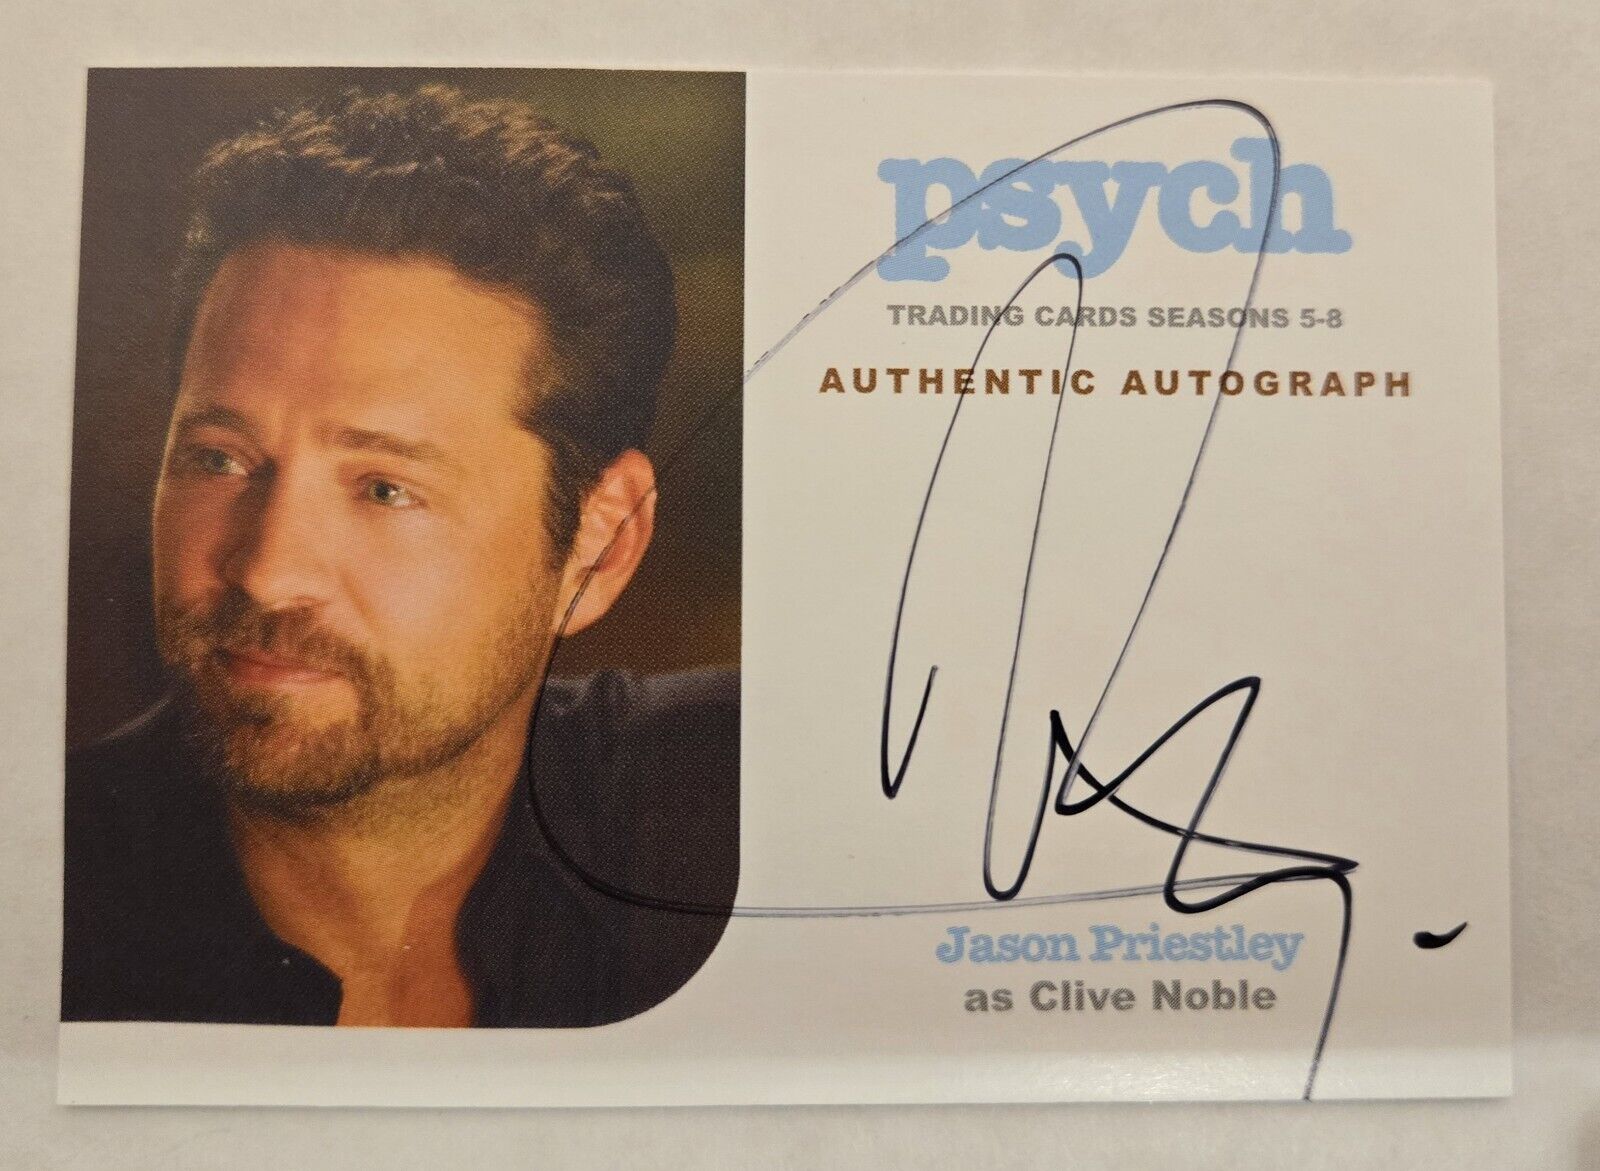 Psych seasons 5-8 autograph insert card  of Jason Priestley as Clive Noble